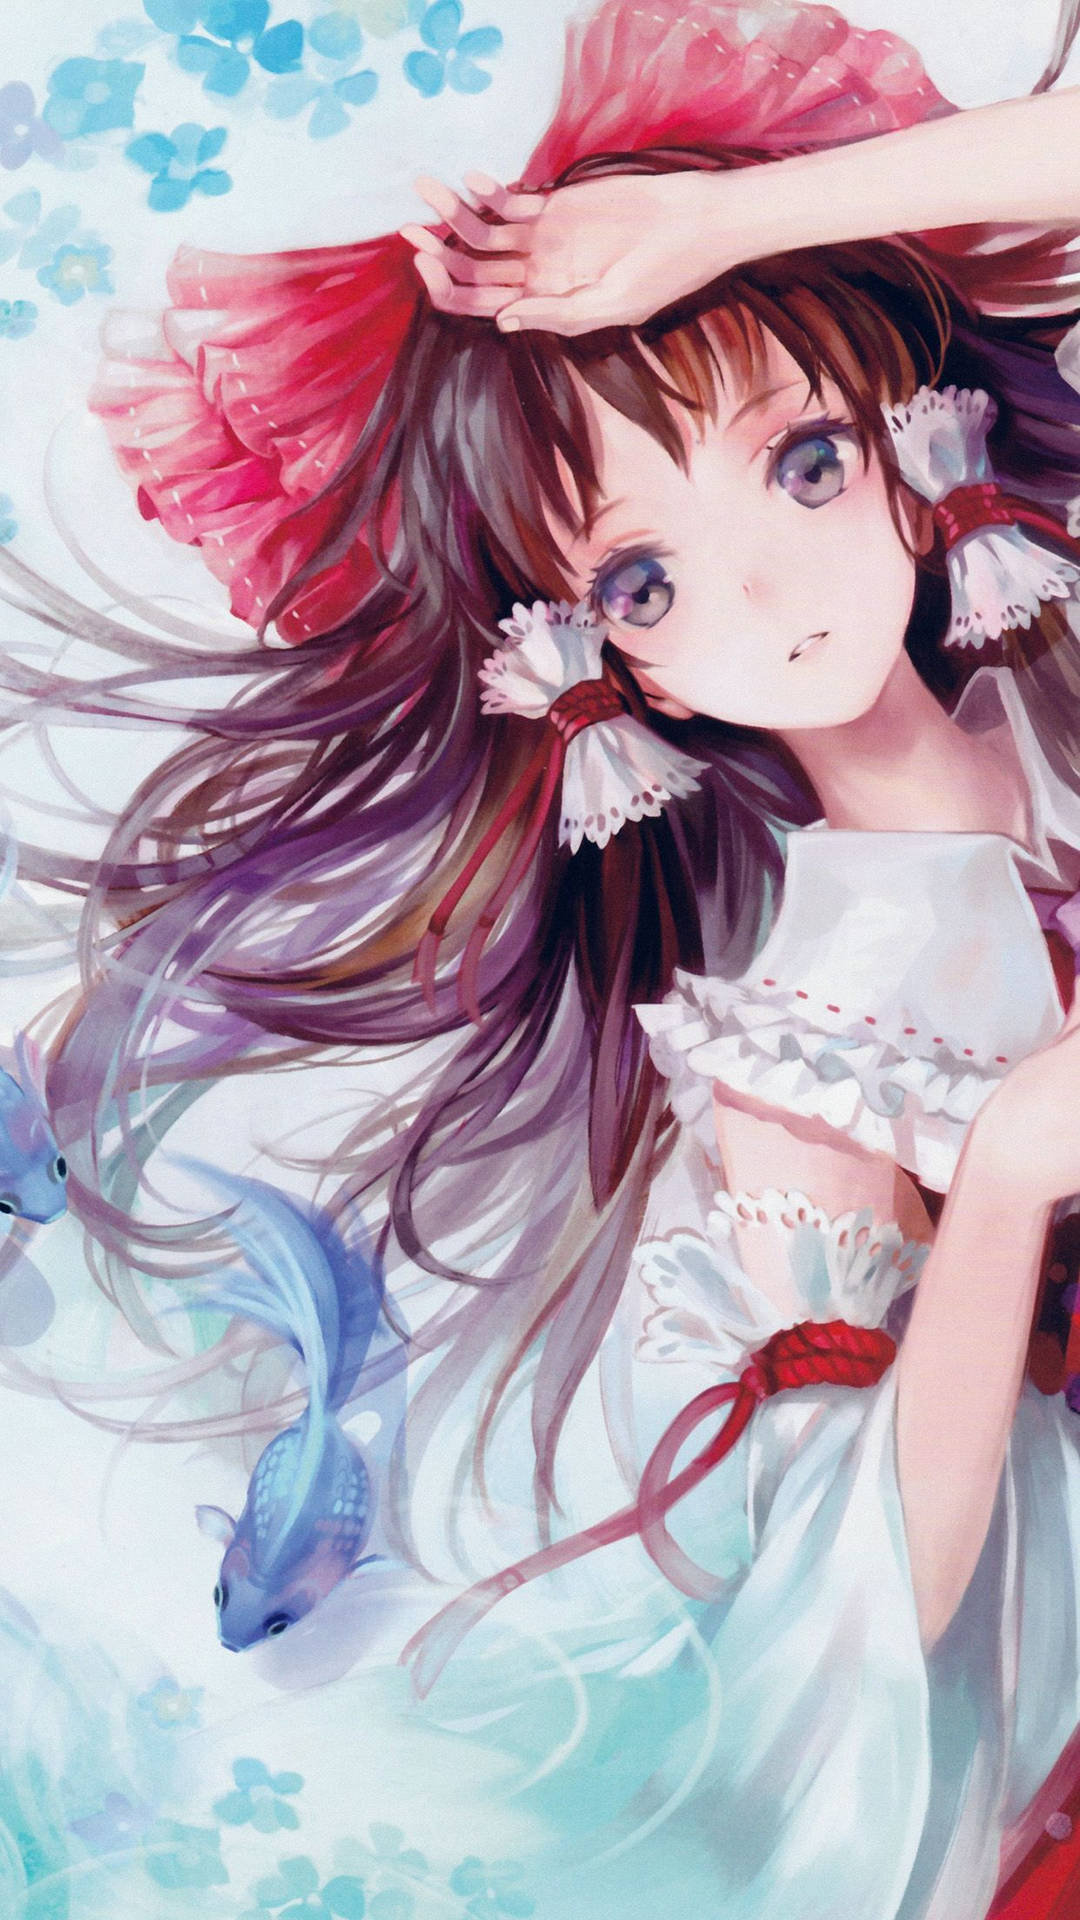 Dainty Outfit Cute Anime Girl Iphone Wallpaper